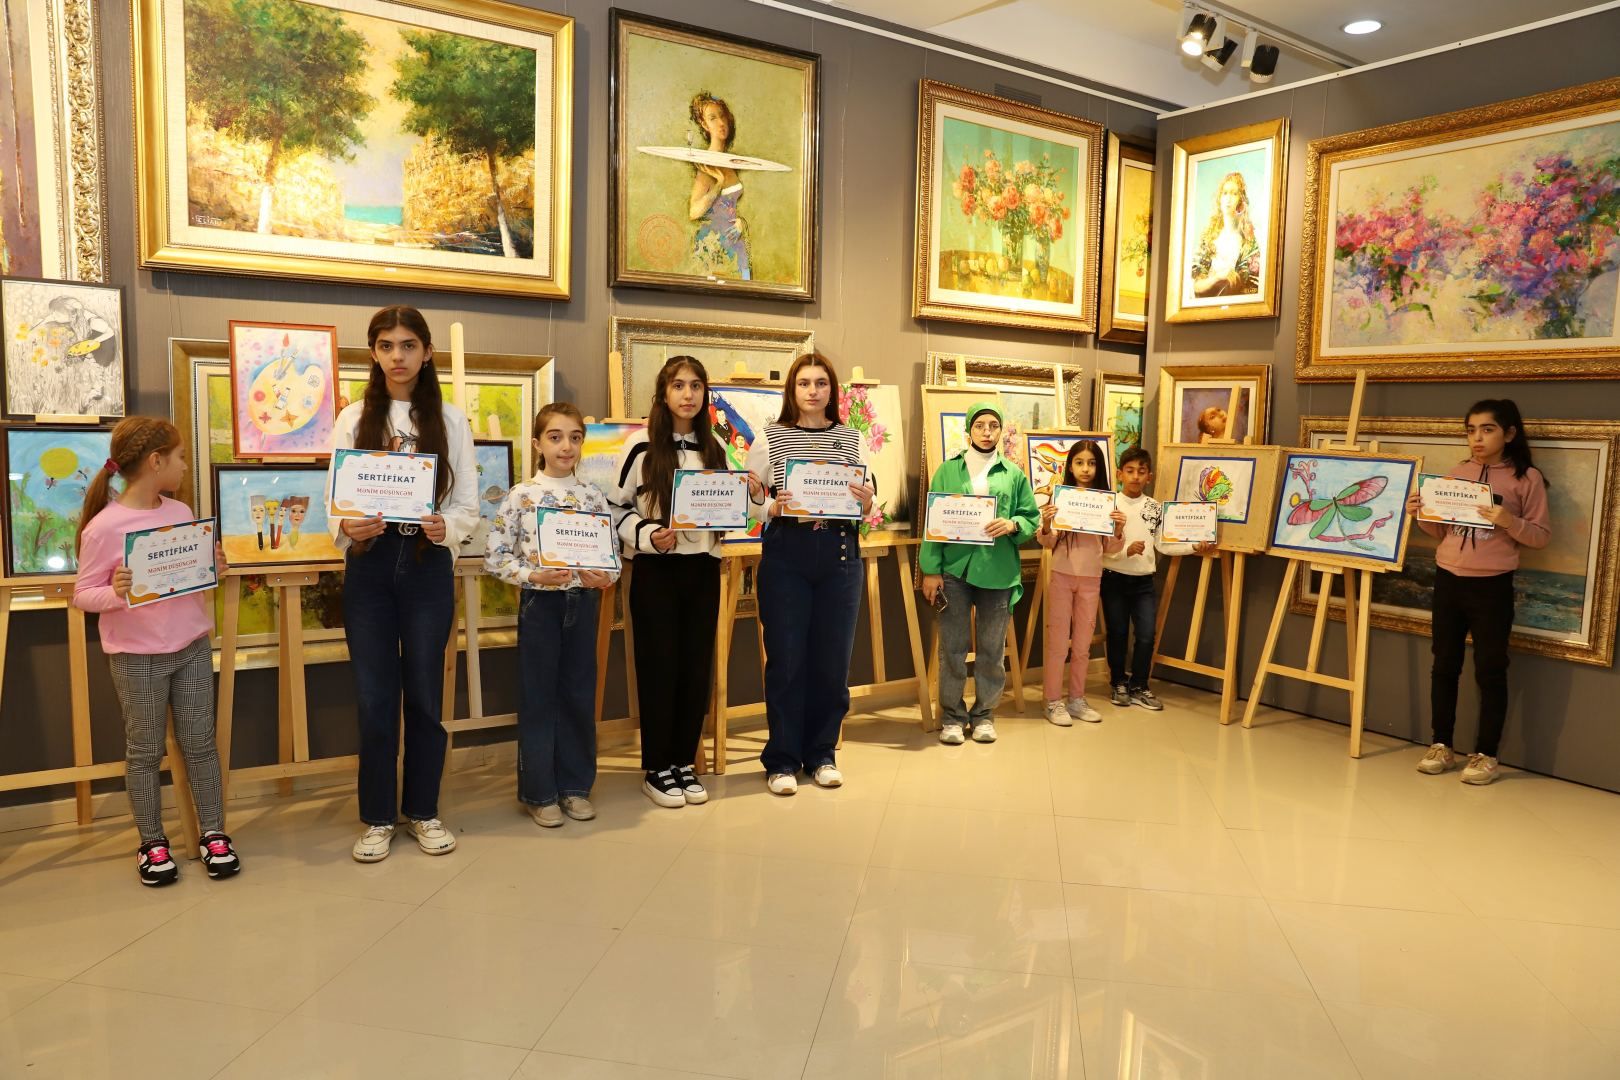 Khatai Arts Center showcases art works by young talents [PHOTOS]